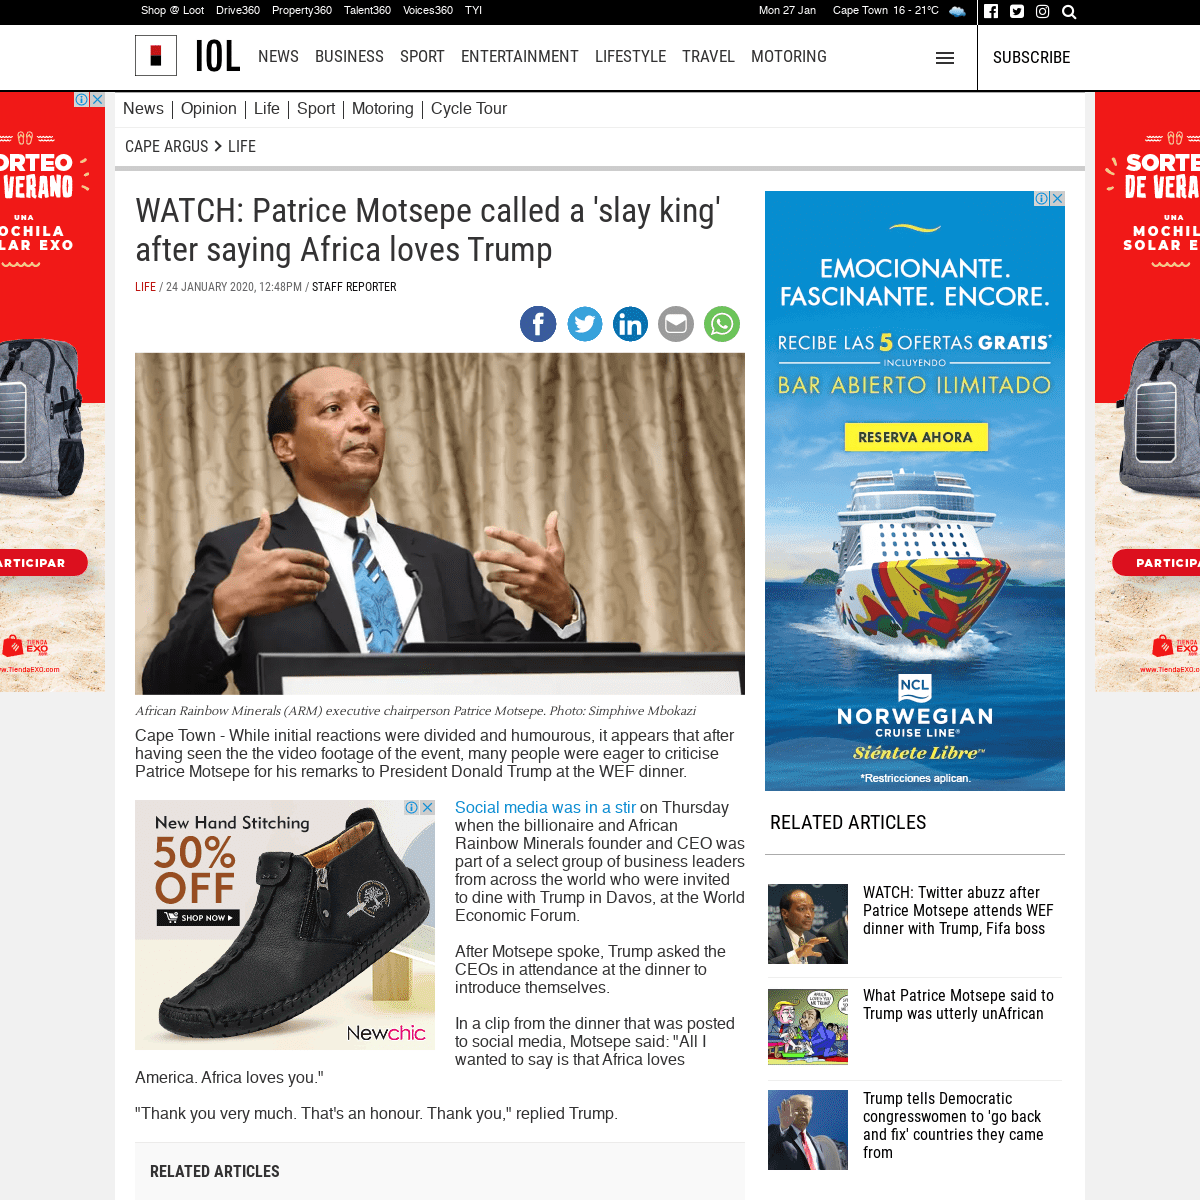 A complete backup of www.iol.co.za/capeargus/life/watch-patrice-motsepe-called-a-slay-king-after-saying-africa-loves-trump-41254